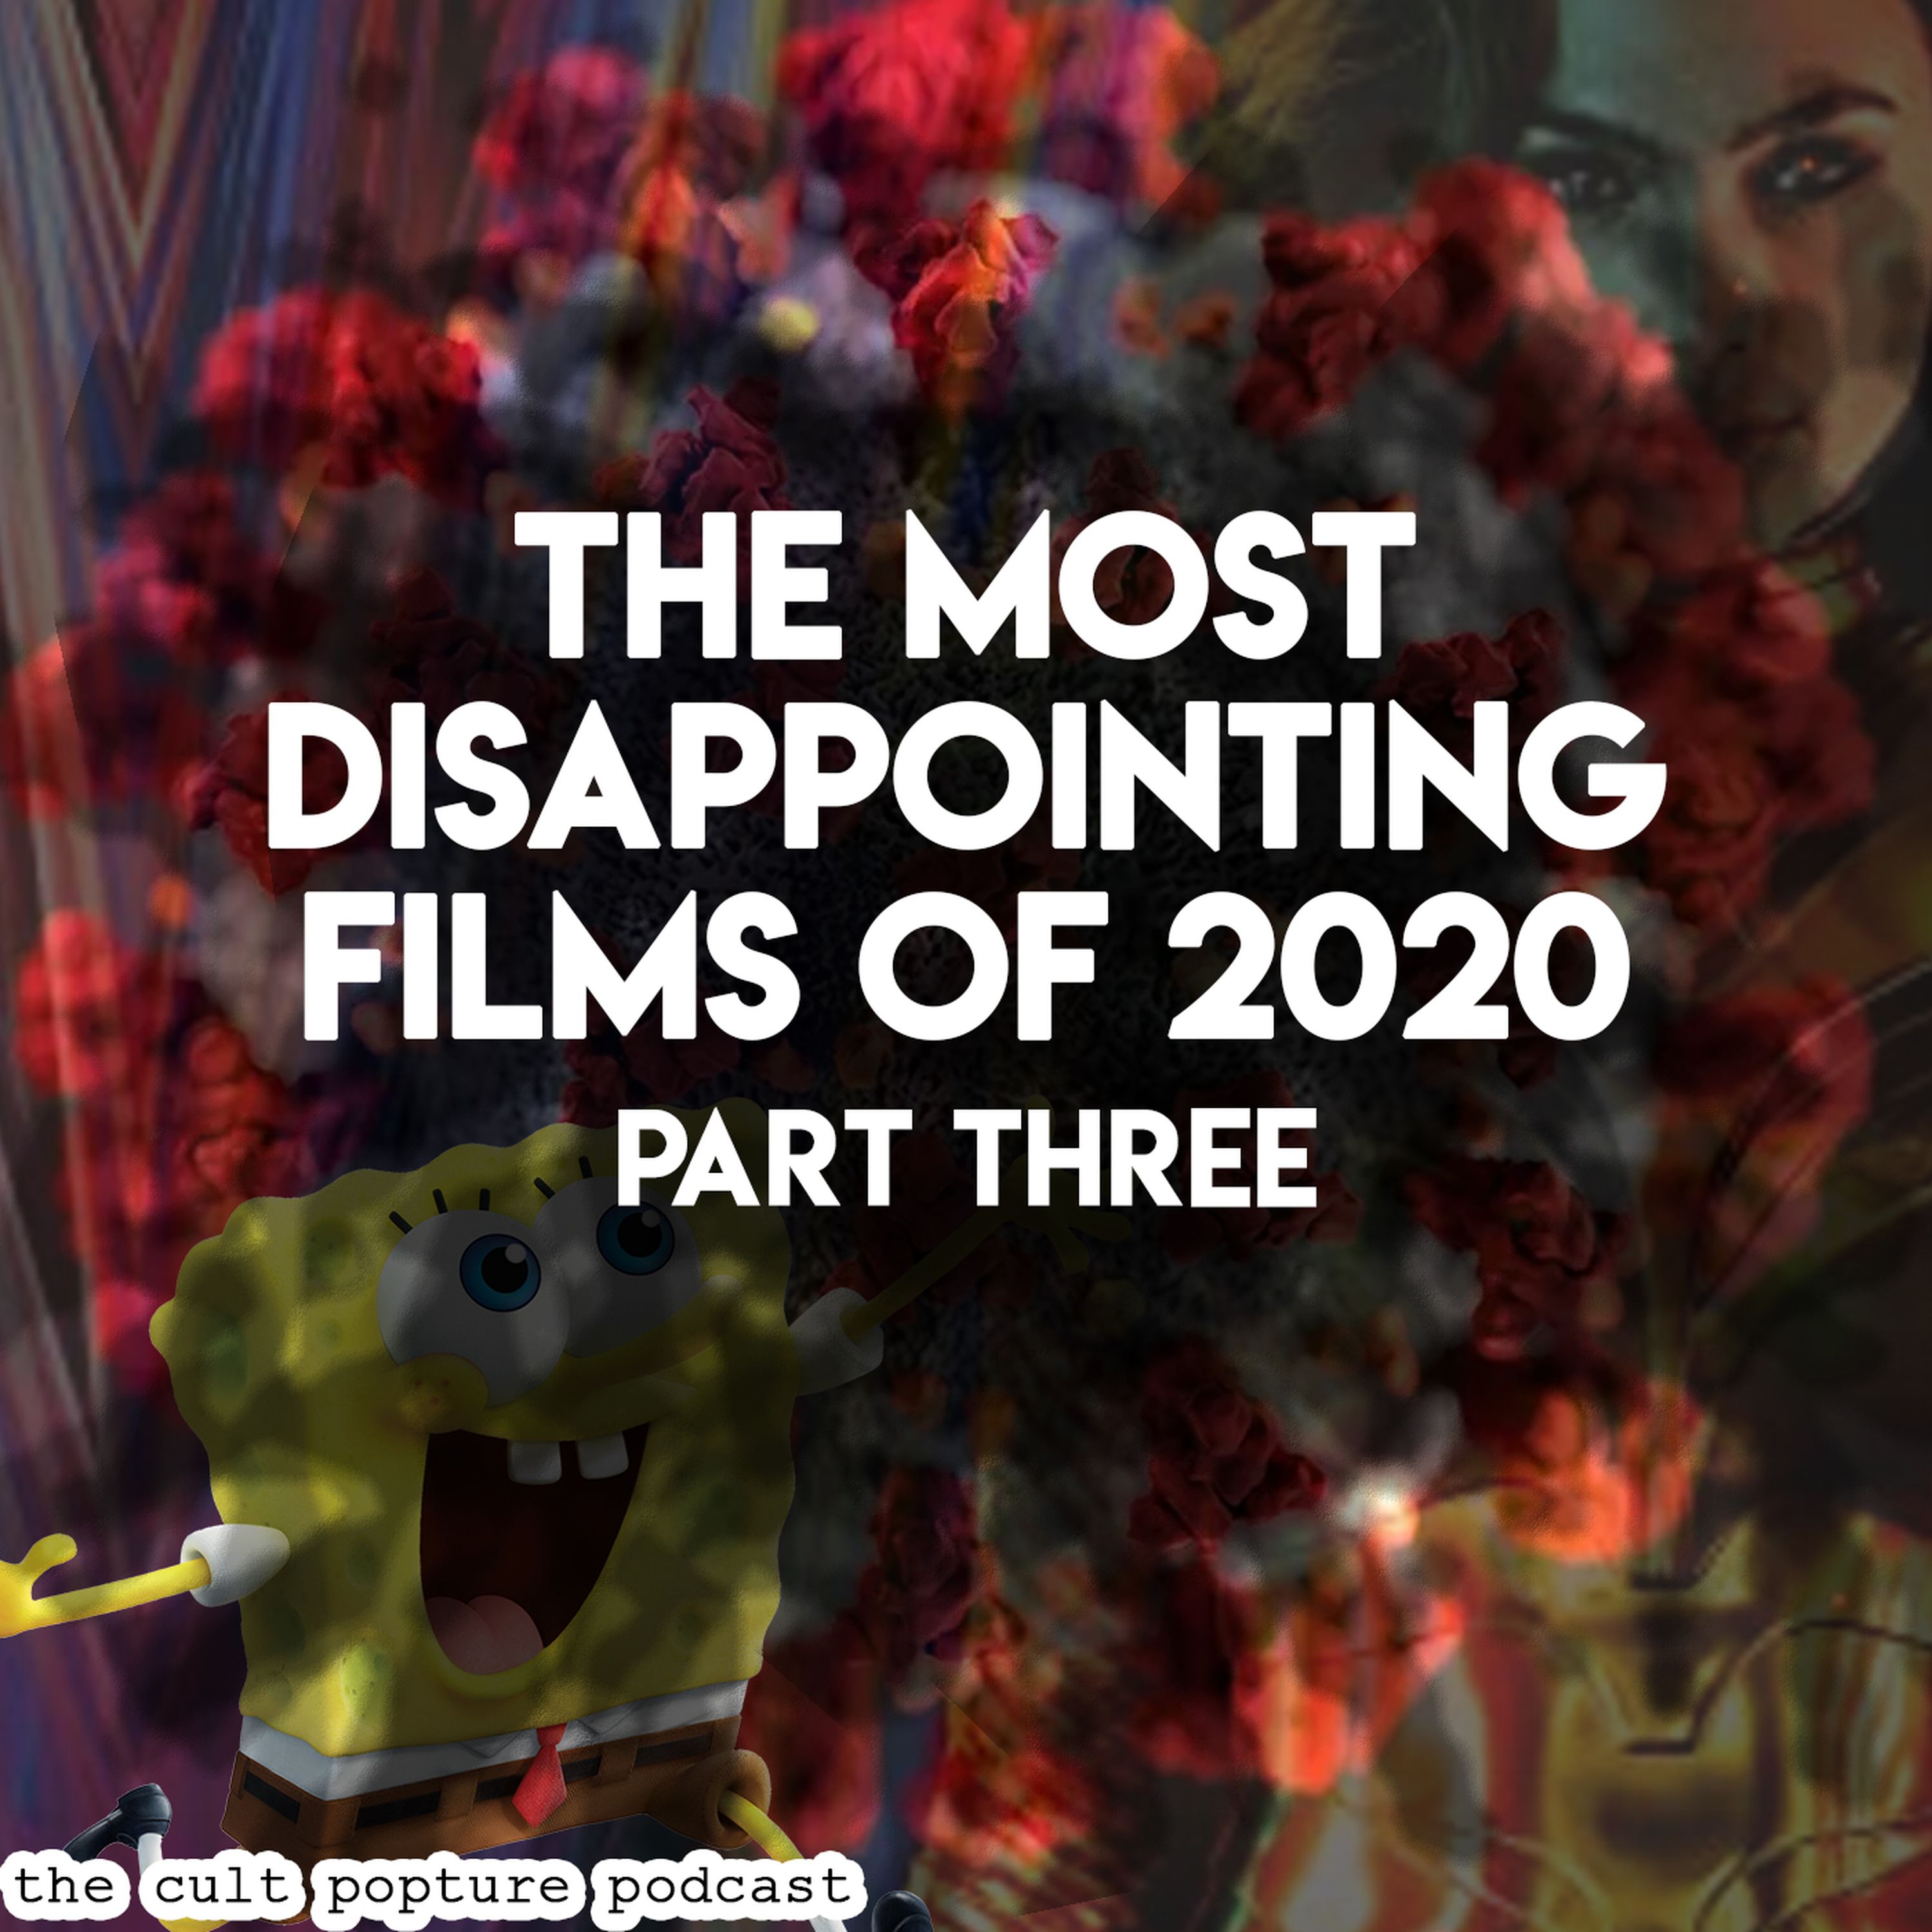 The Most Disappointing Films of 2020 (Part Three) | The Cult Popture Podcast